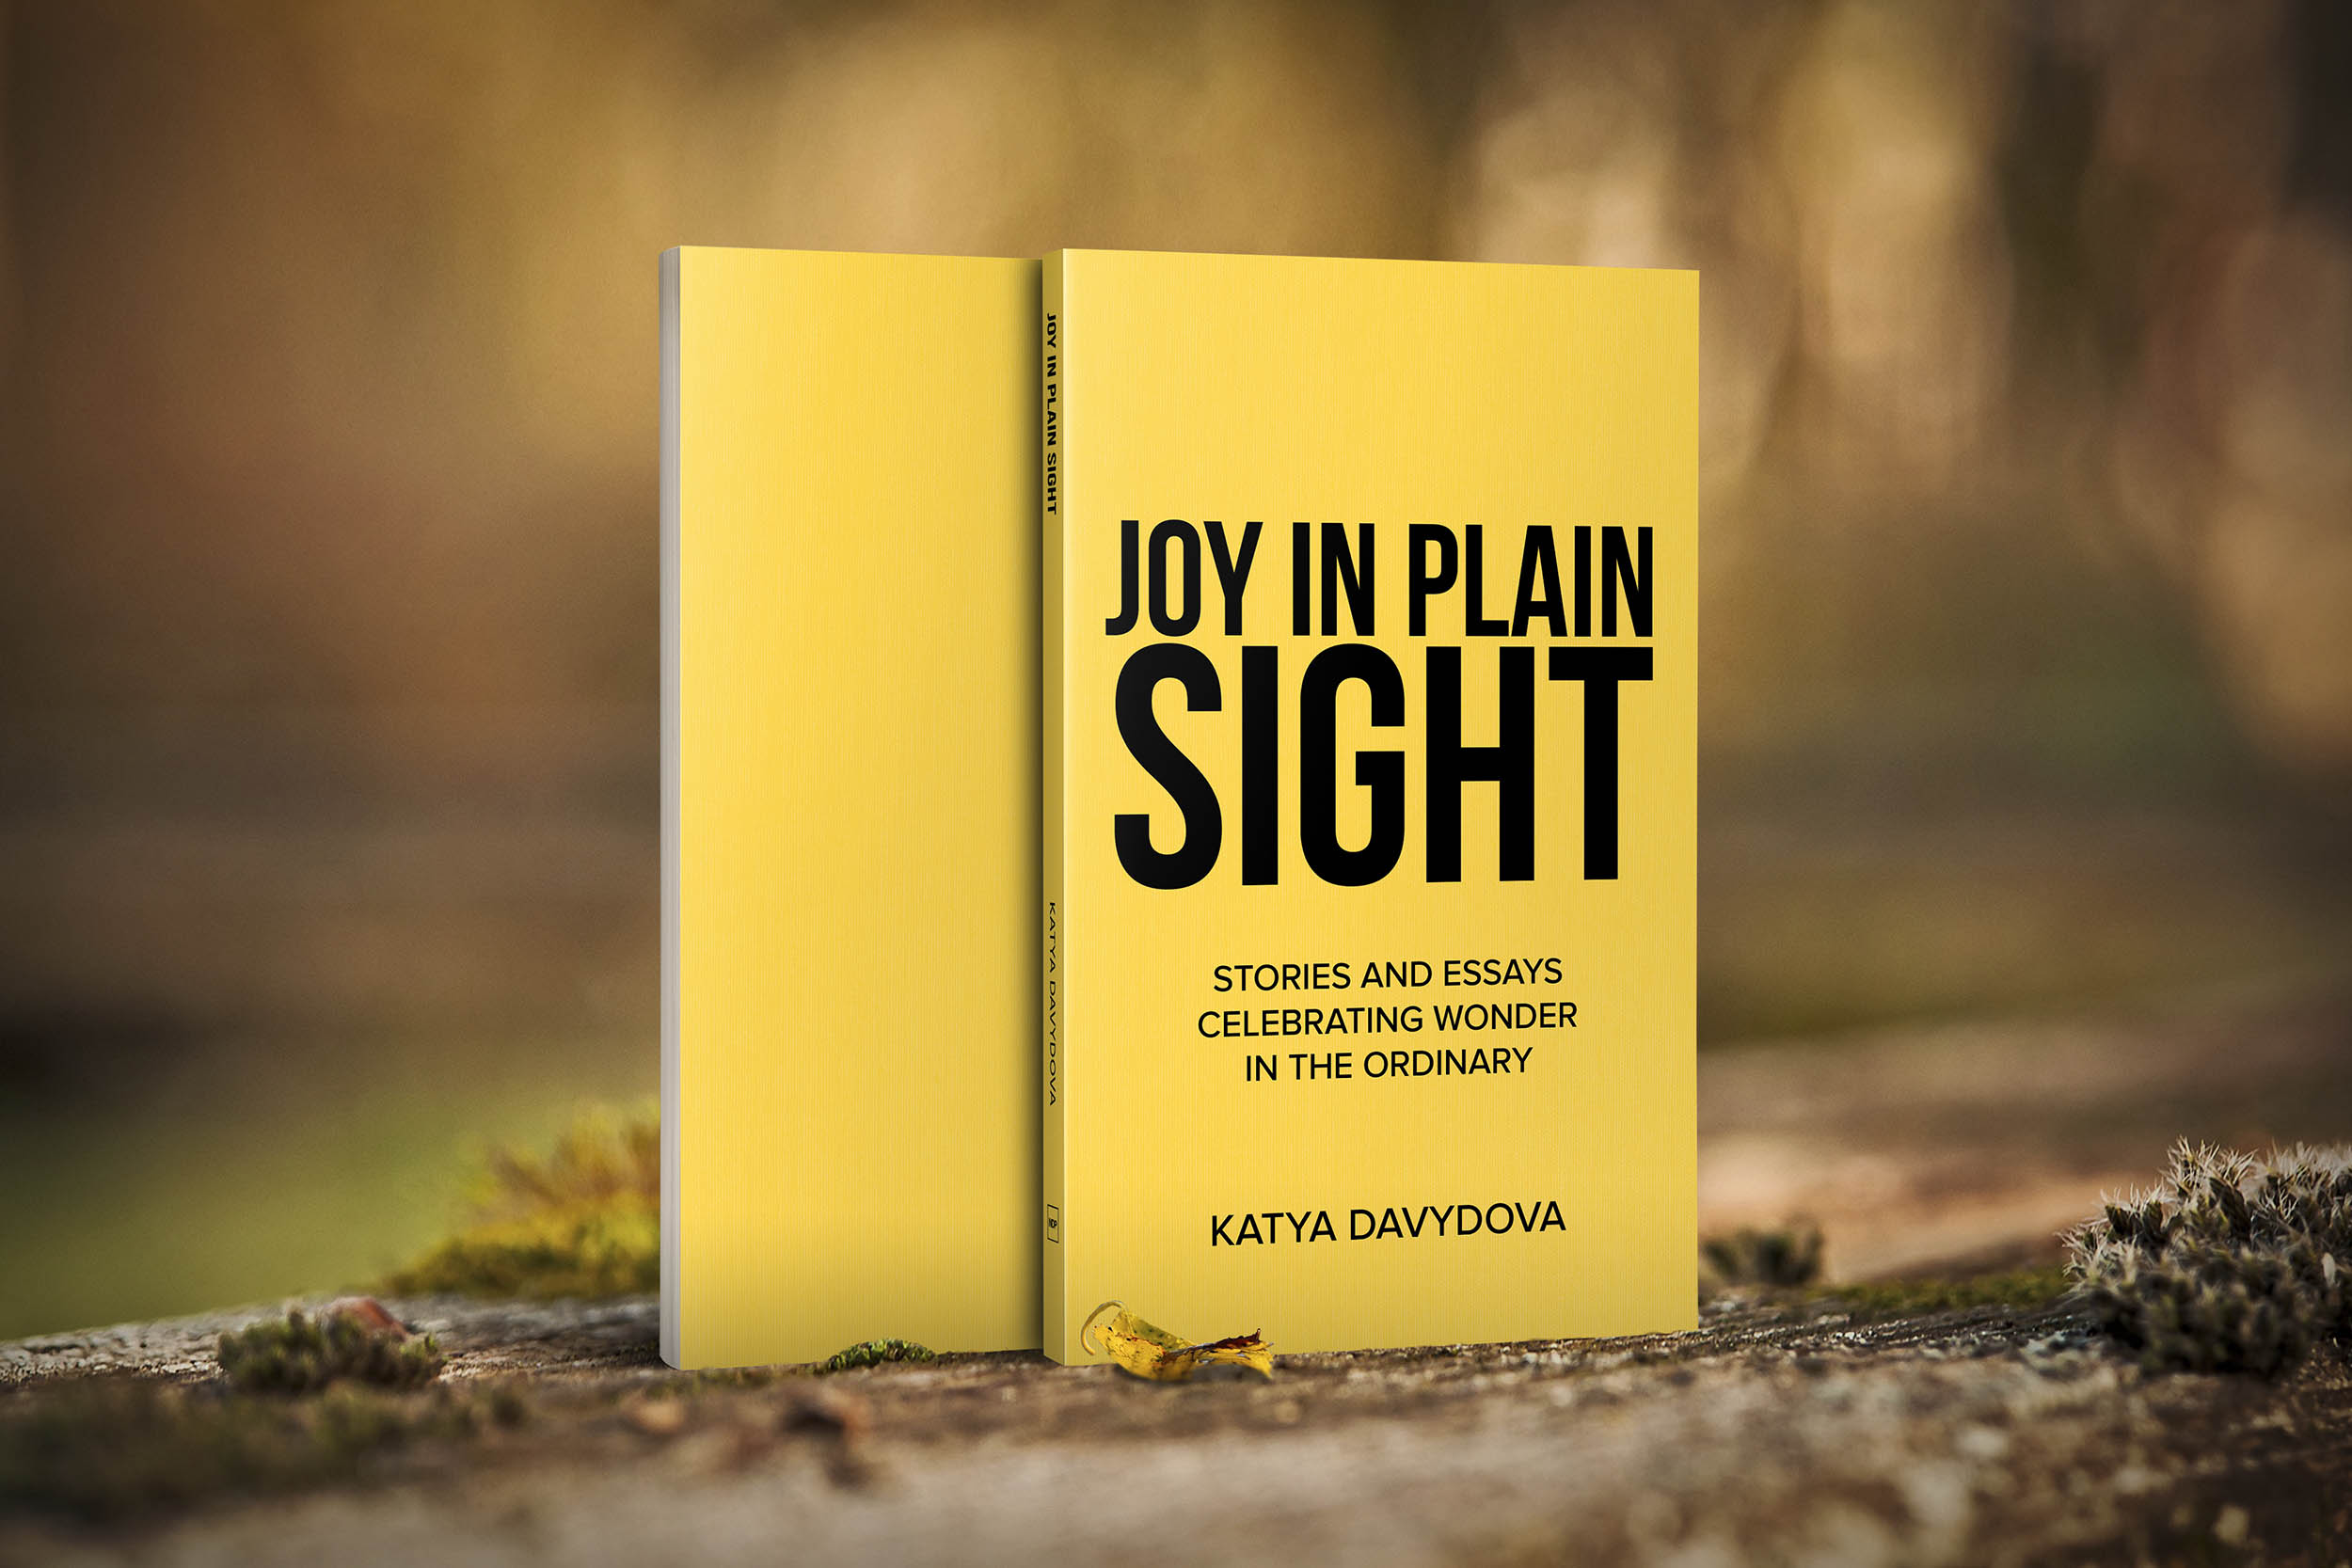 Book Joy in Plain Sight: stories and essays celebrating wonder in the ordinary by Katya Davydova